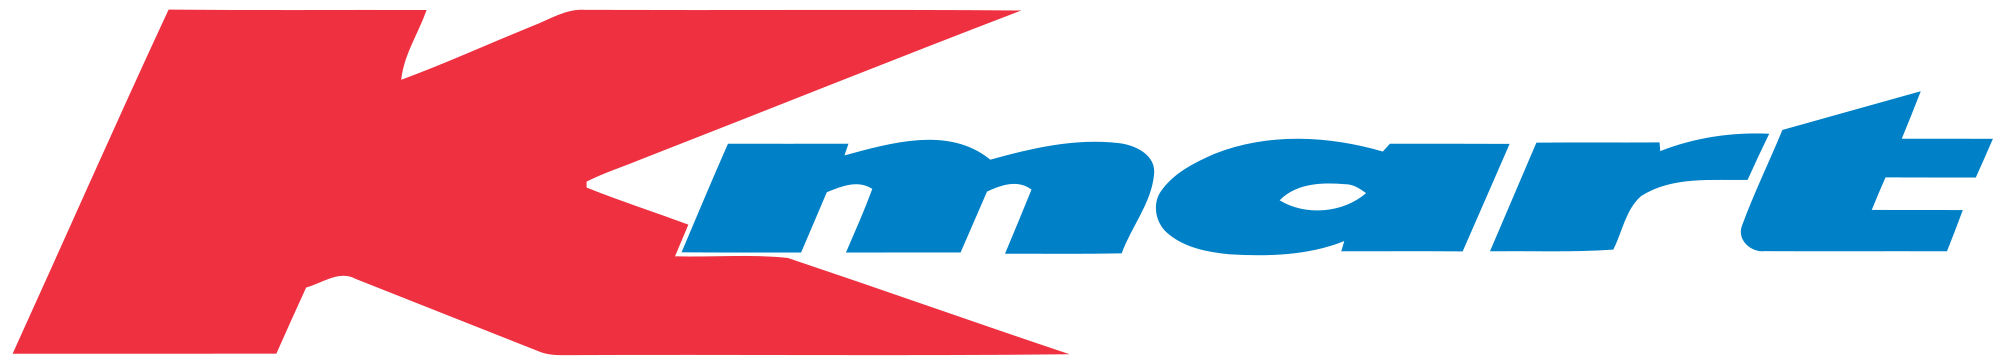 Kmary Logo - Collection of Kmart Logo Png (image in Collection)